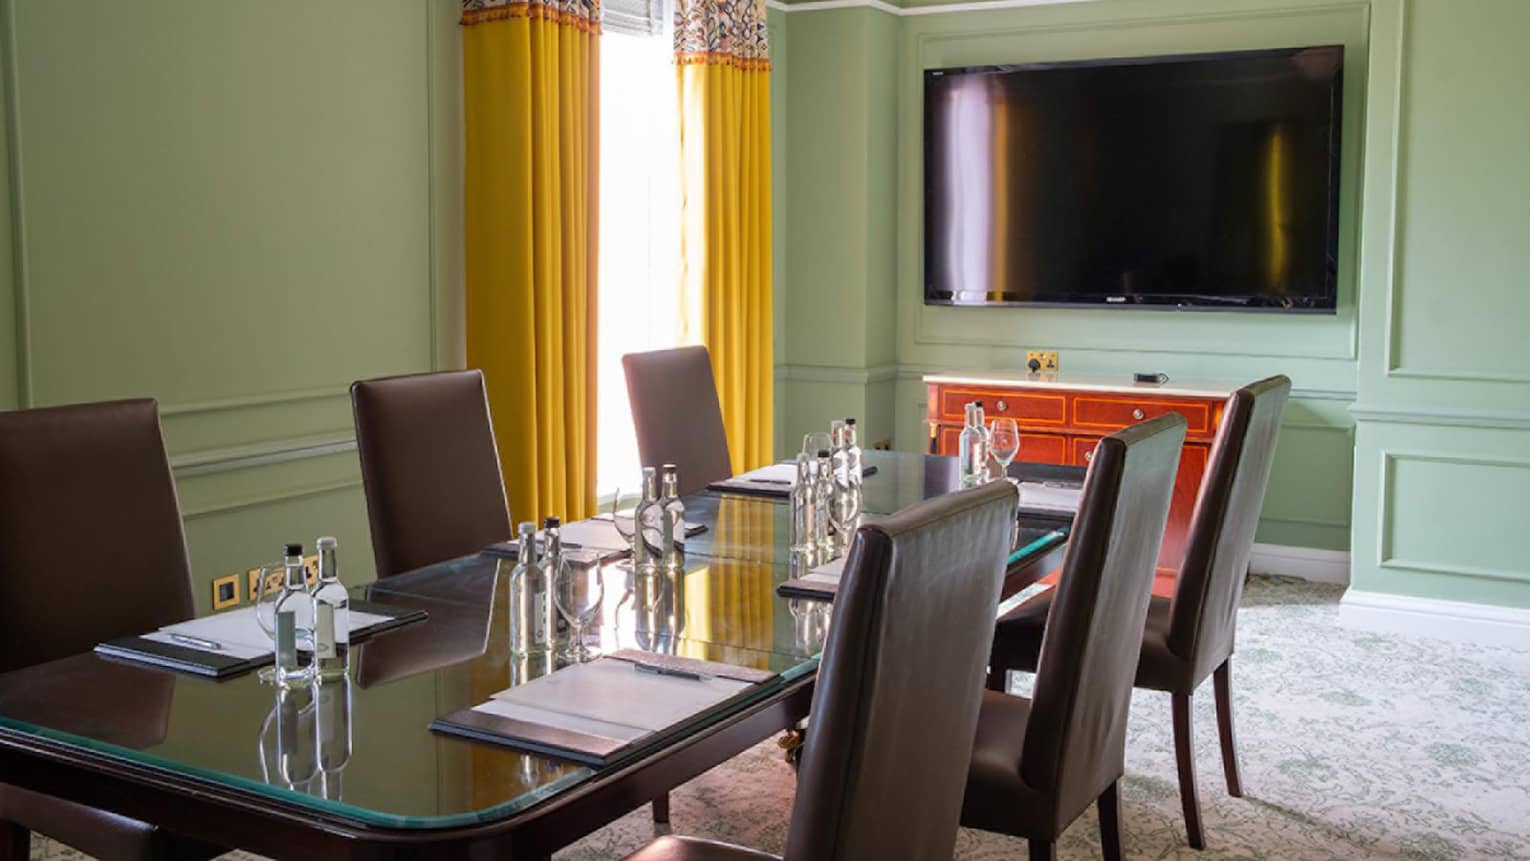 Green-walled boardroom with glass-topped meeting table, brown leather chairs and wall TV